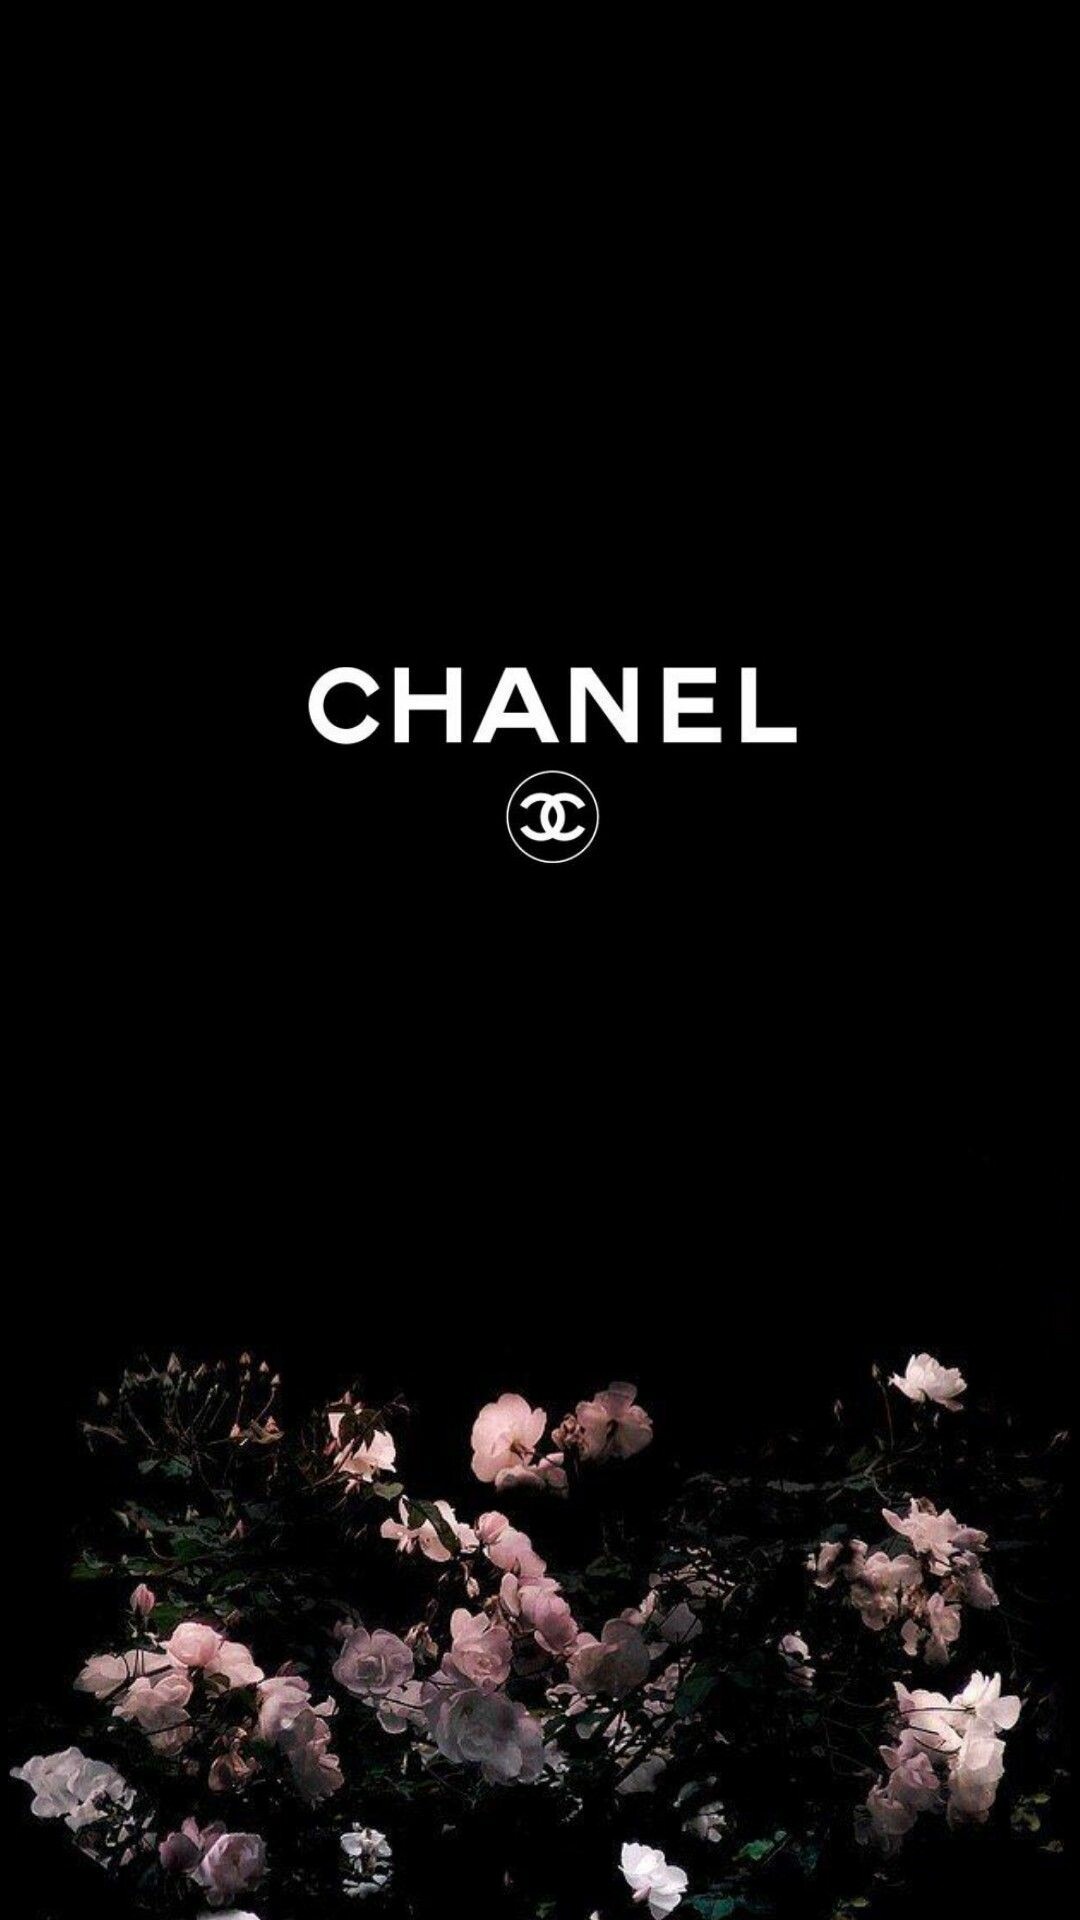 Chanel: Currently owned by Alain and Gerard Wertheimer. 1080x1920 Full HD Background.